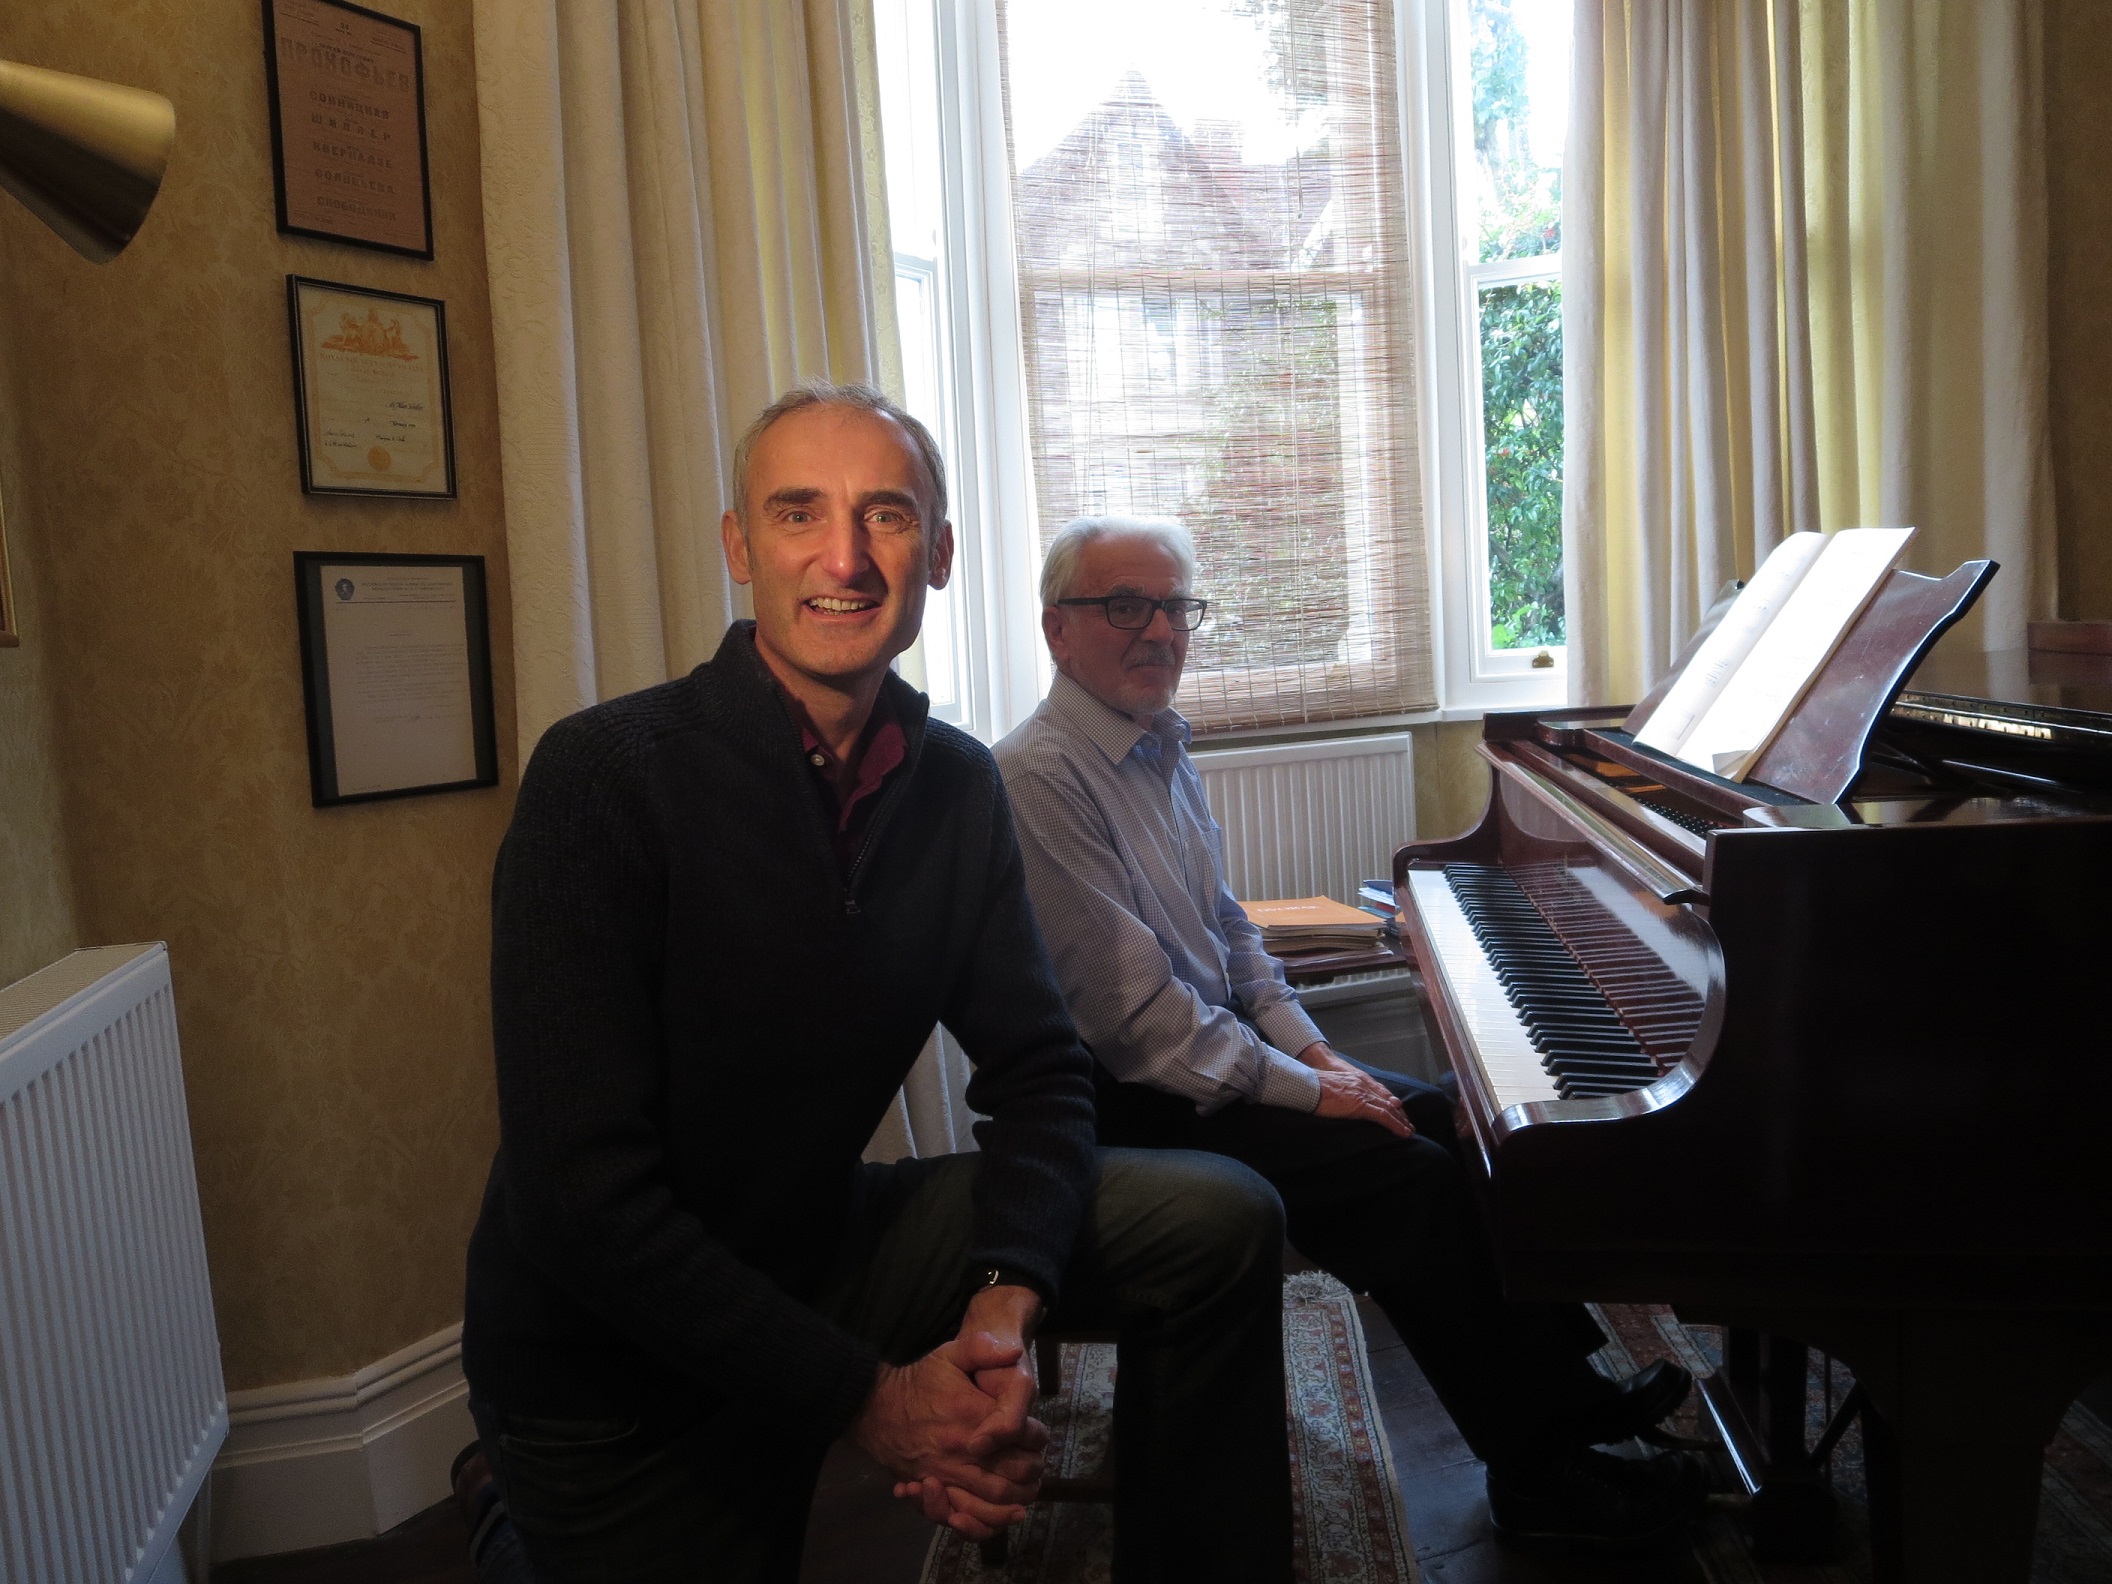 Kevin Lindegaard introduces pianist Allan Schiller who is sat at his piano playing Simple Gifts